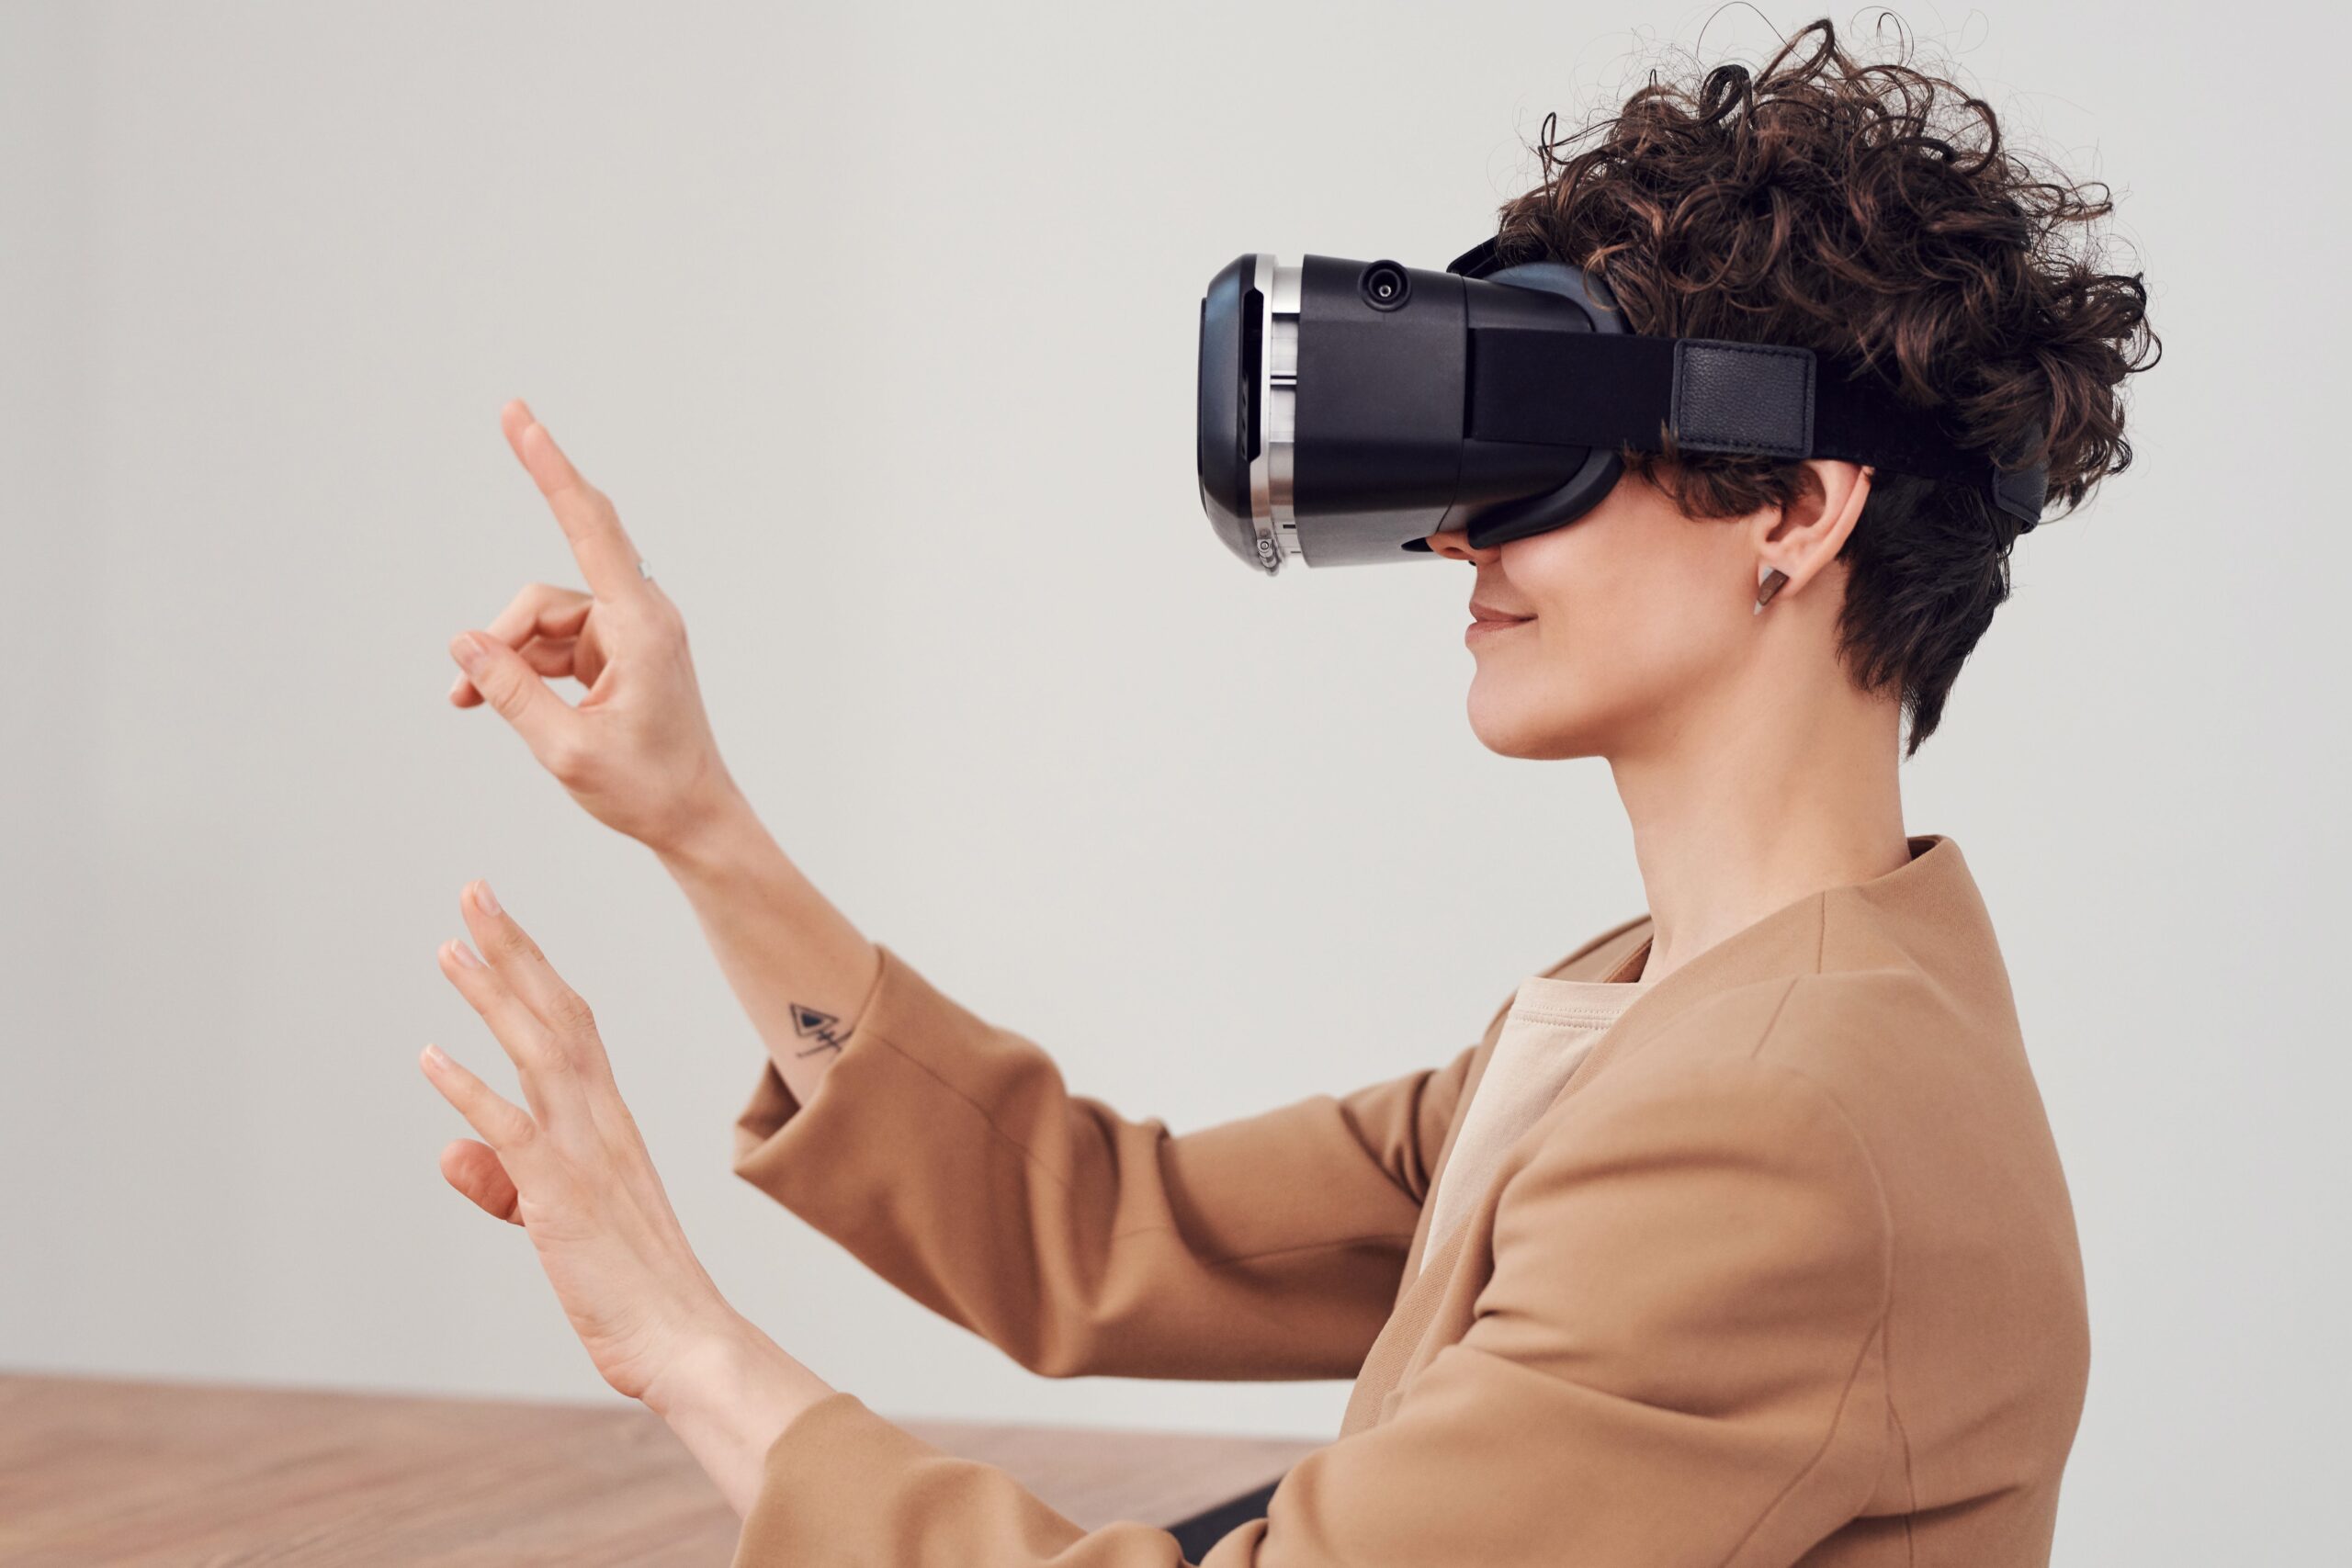 women with virtual wearable technology experiencing augmented and virtual reality luxury travel